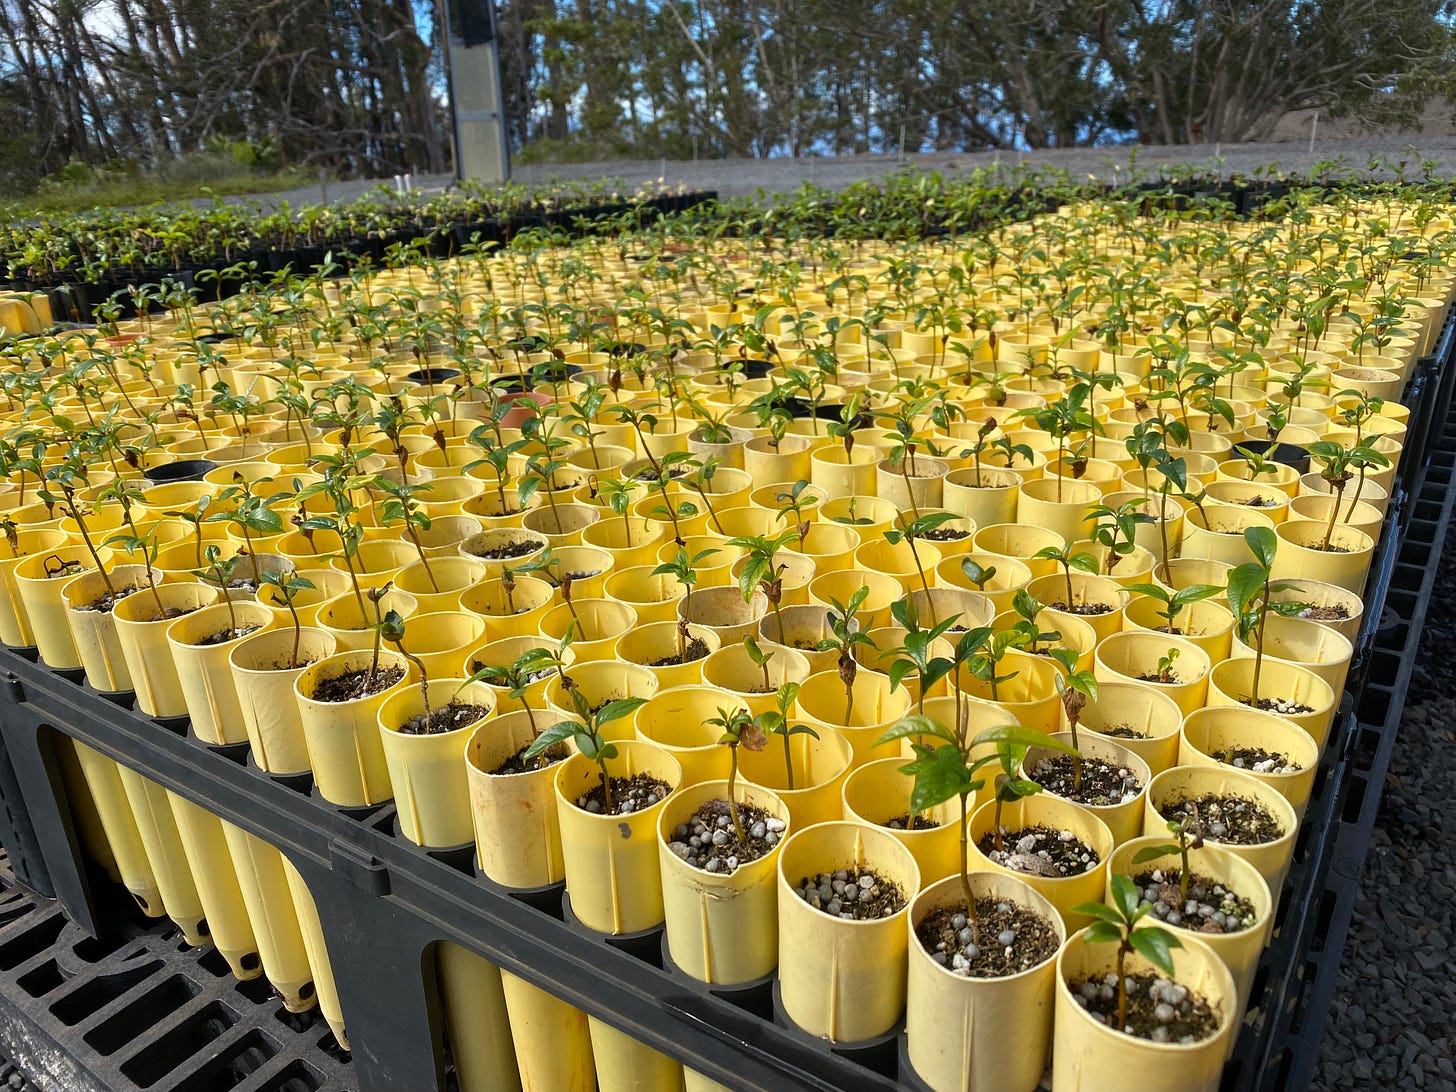 Close-up of a thousand seedlings a couple inches high, each in its own yellow planting tube or dibble